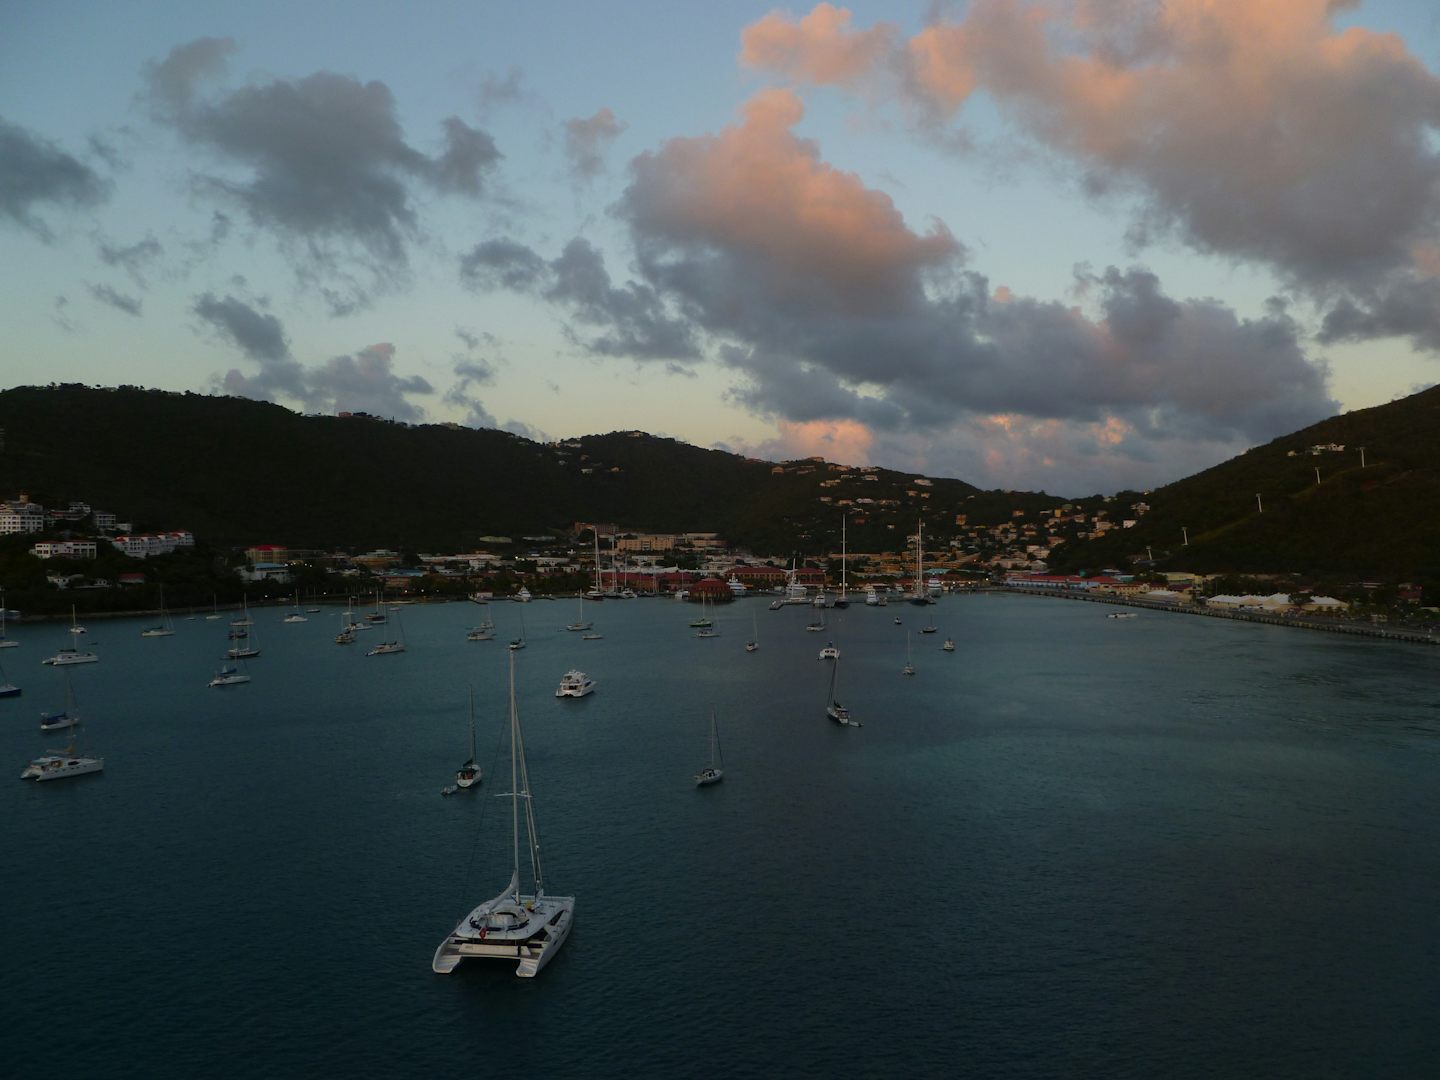 Boats anchored in port in St. Thomas, USVI while the ship sails away at sunset